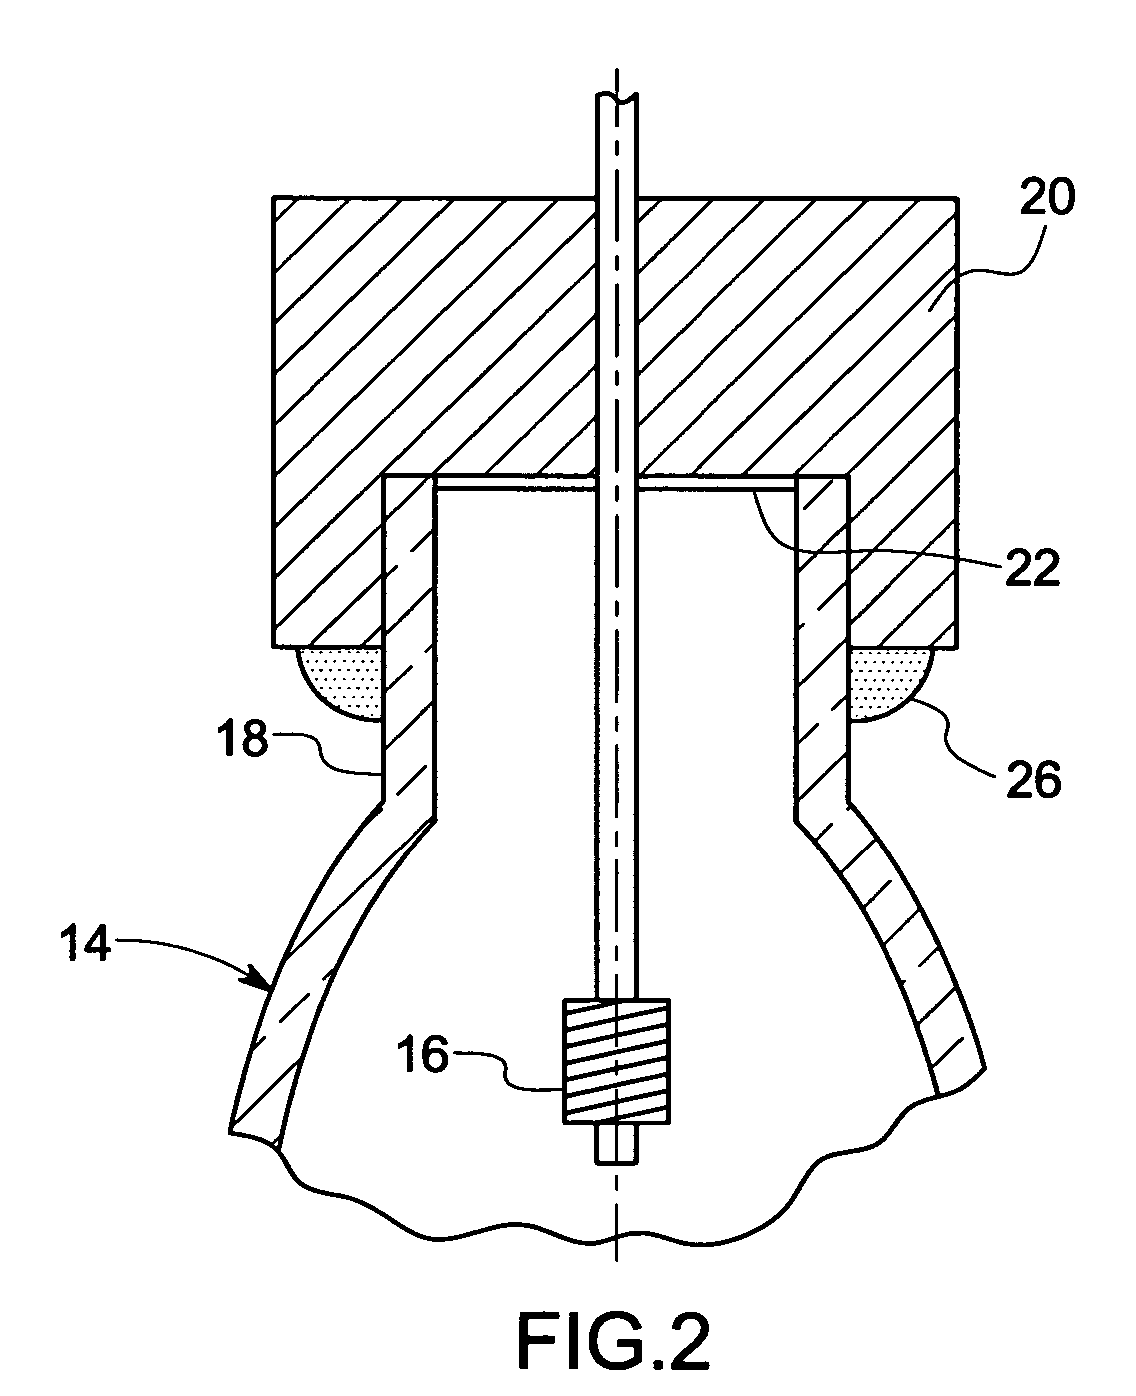 Ceramic bonding composition, method of making, and article of manufacture incorporating the same